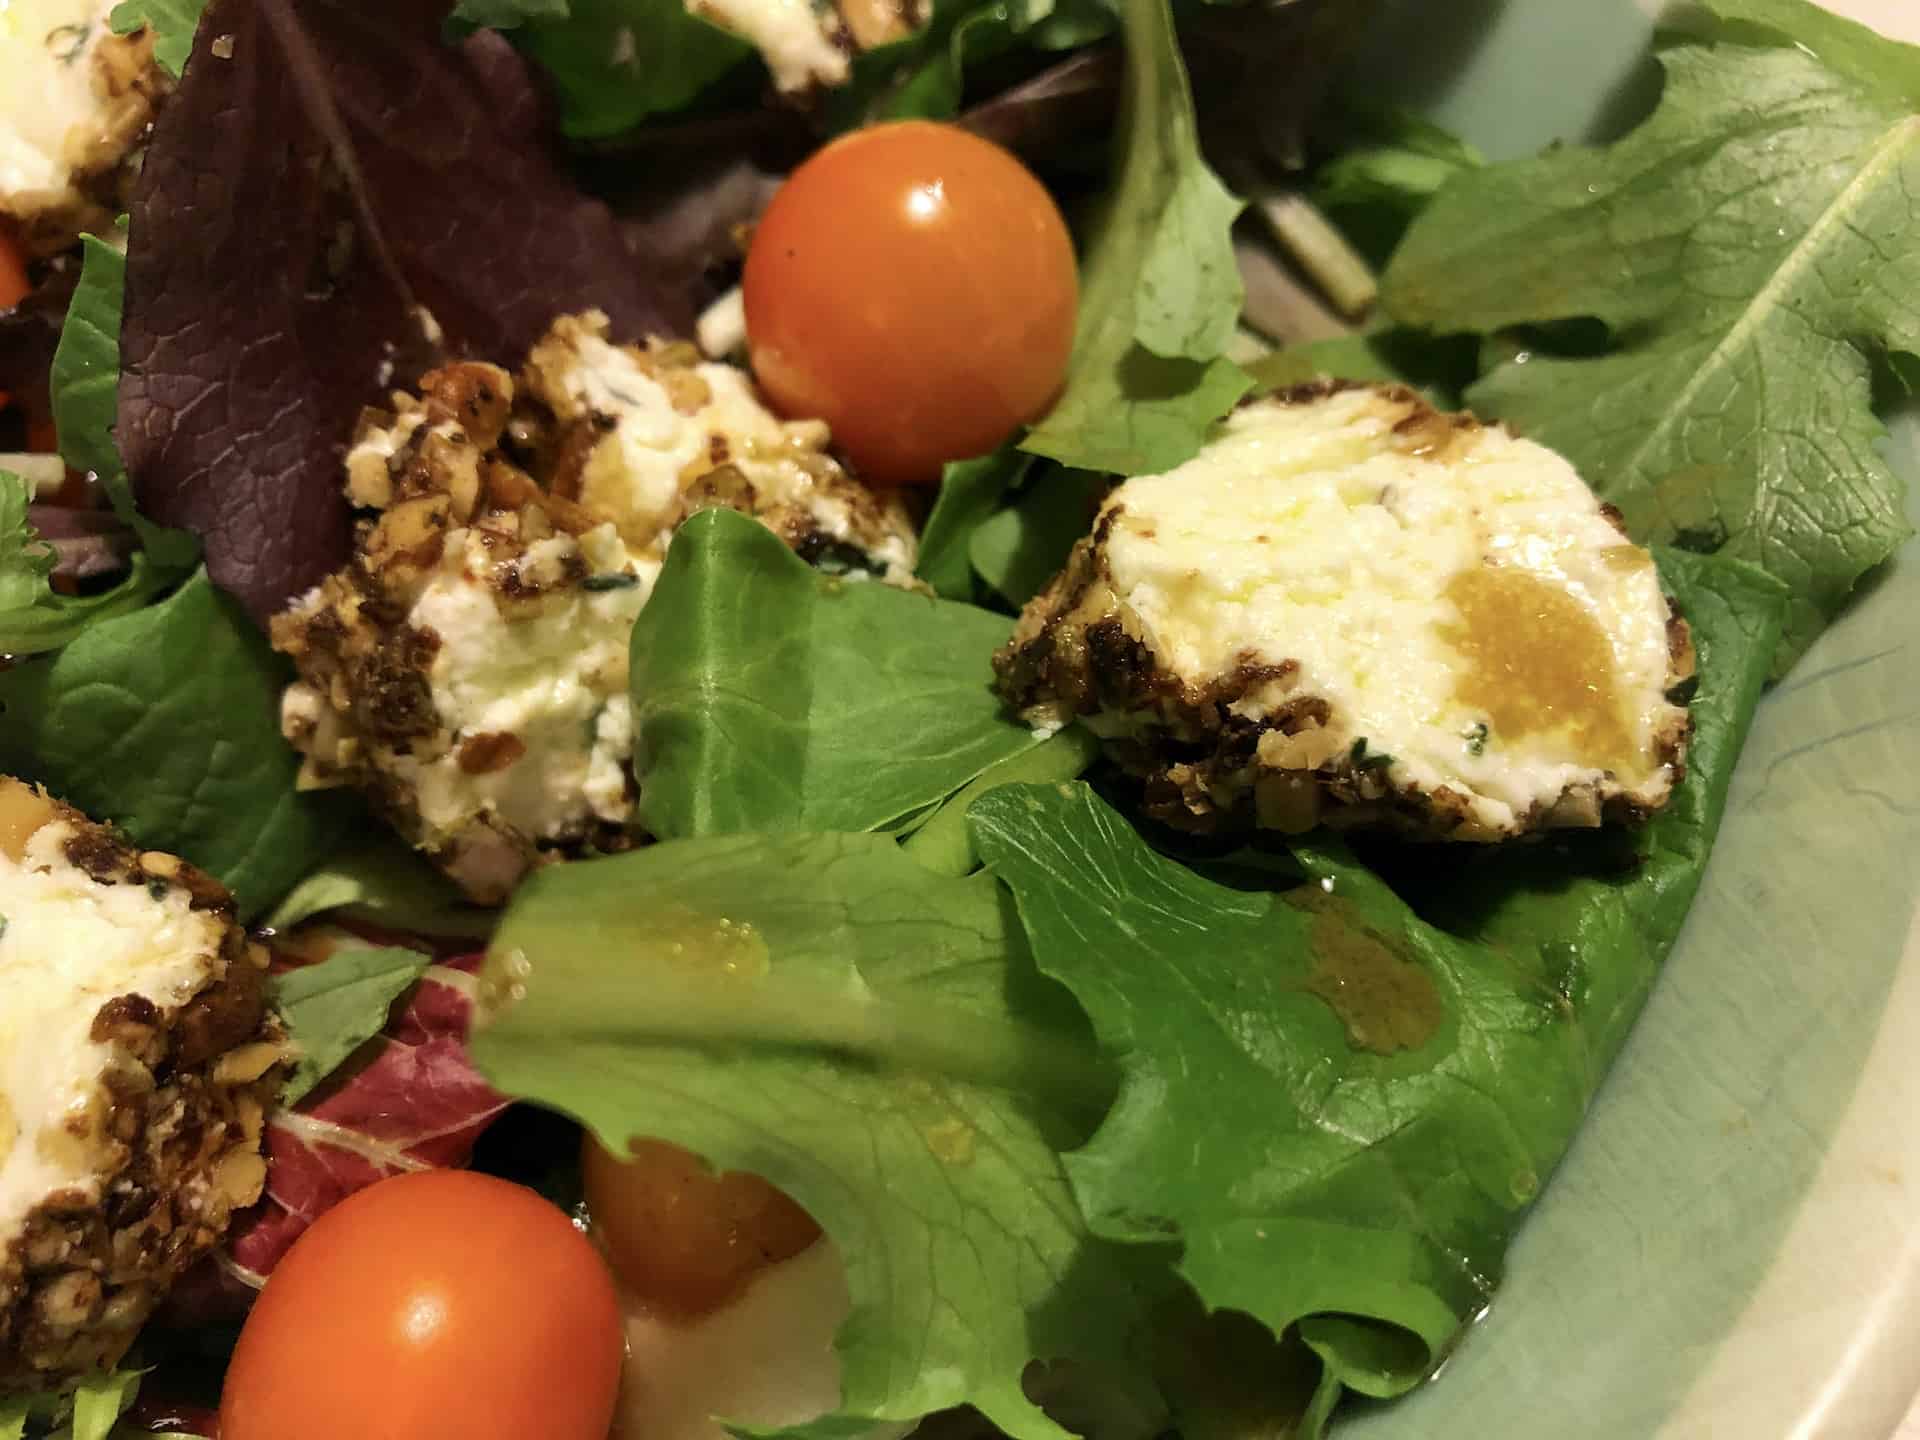 Green Salad with Classic Spicy Dijon Vinaigrette with Warm Goat Cheese Medallions